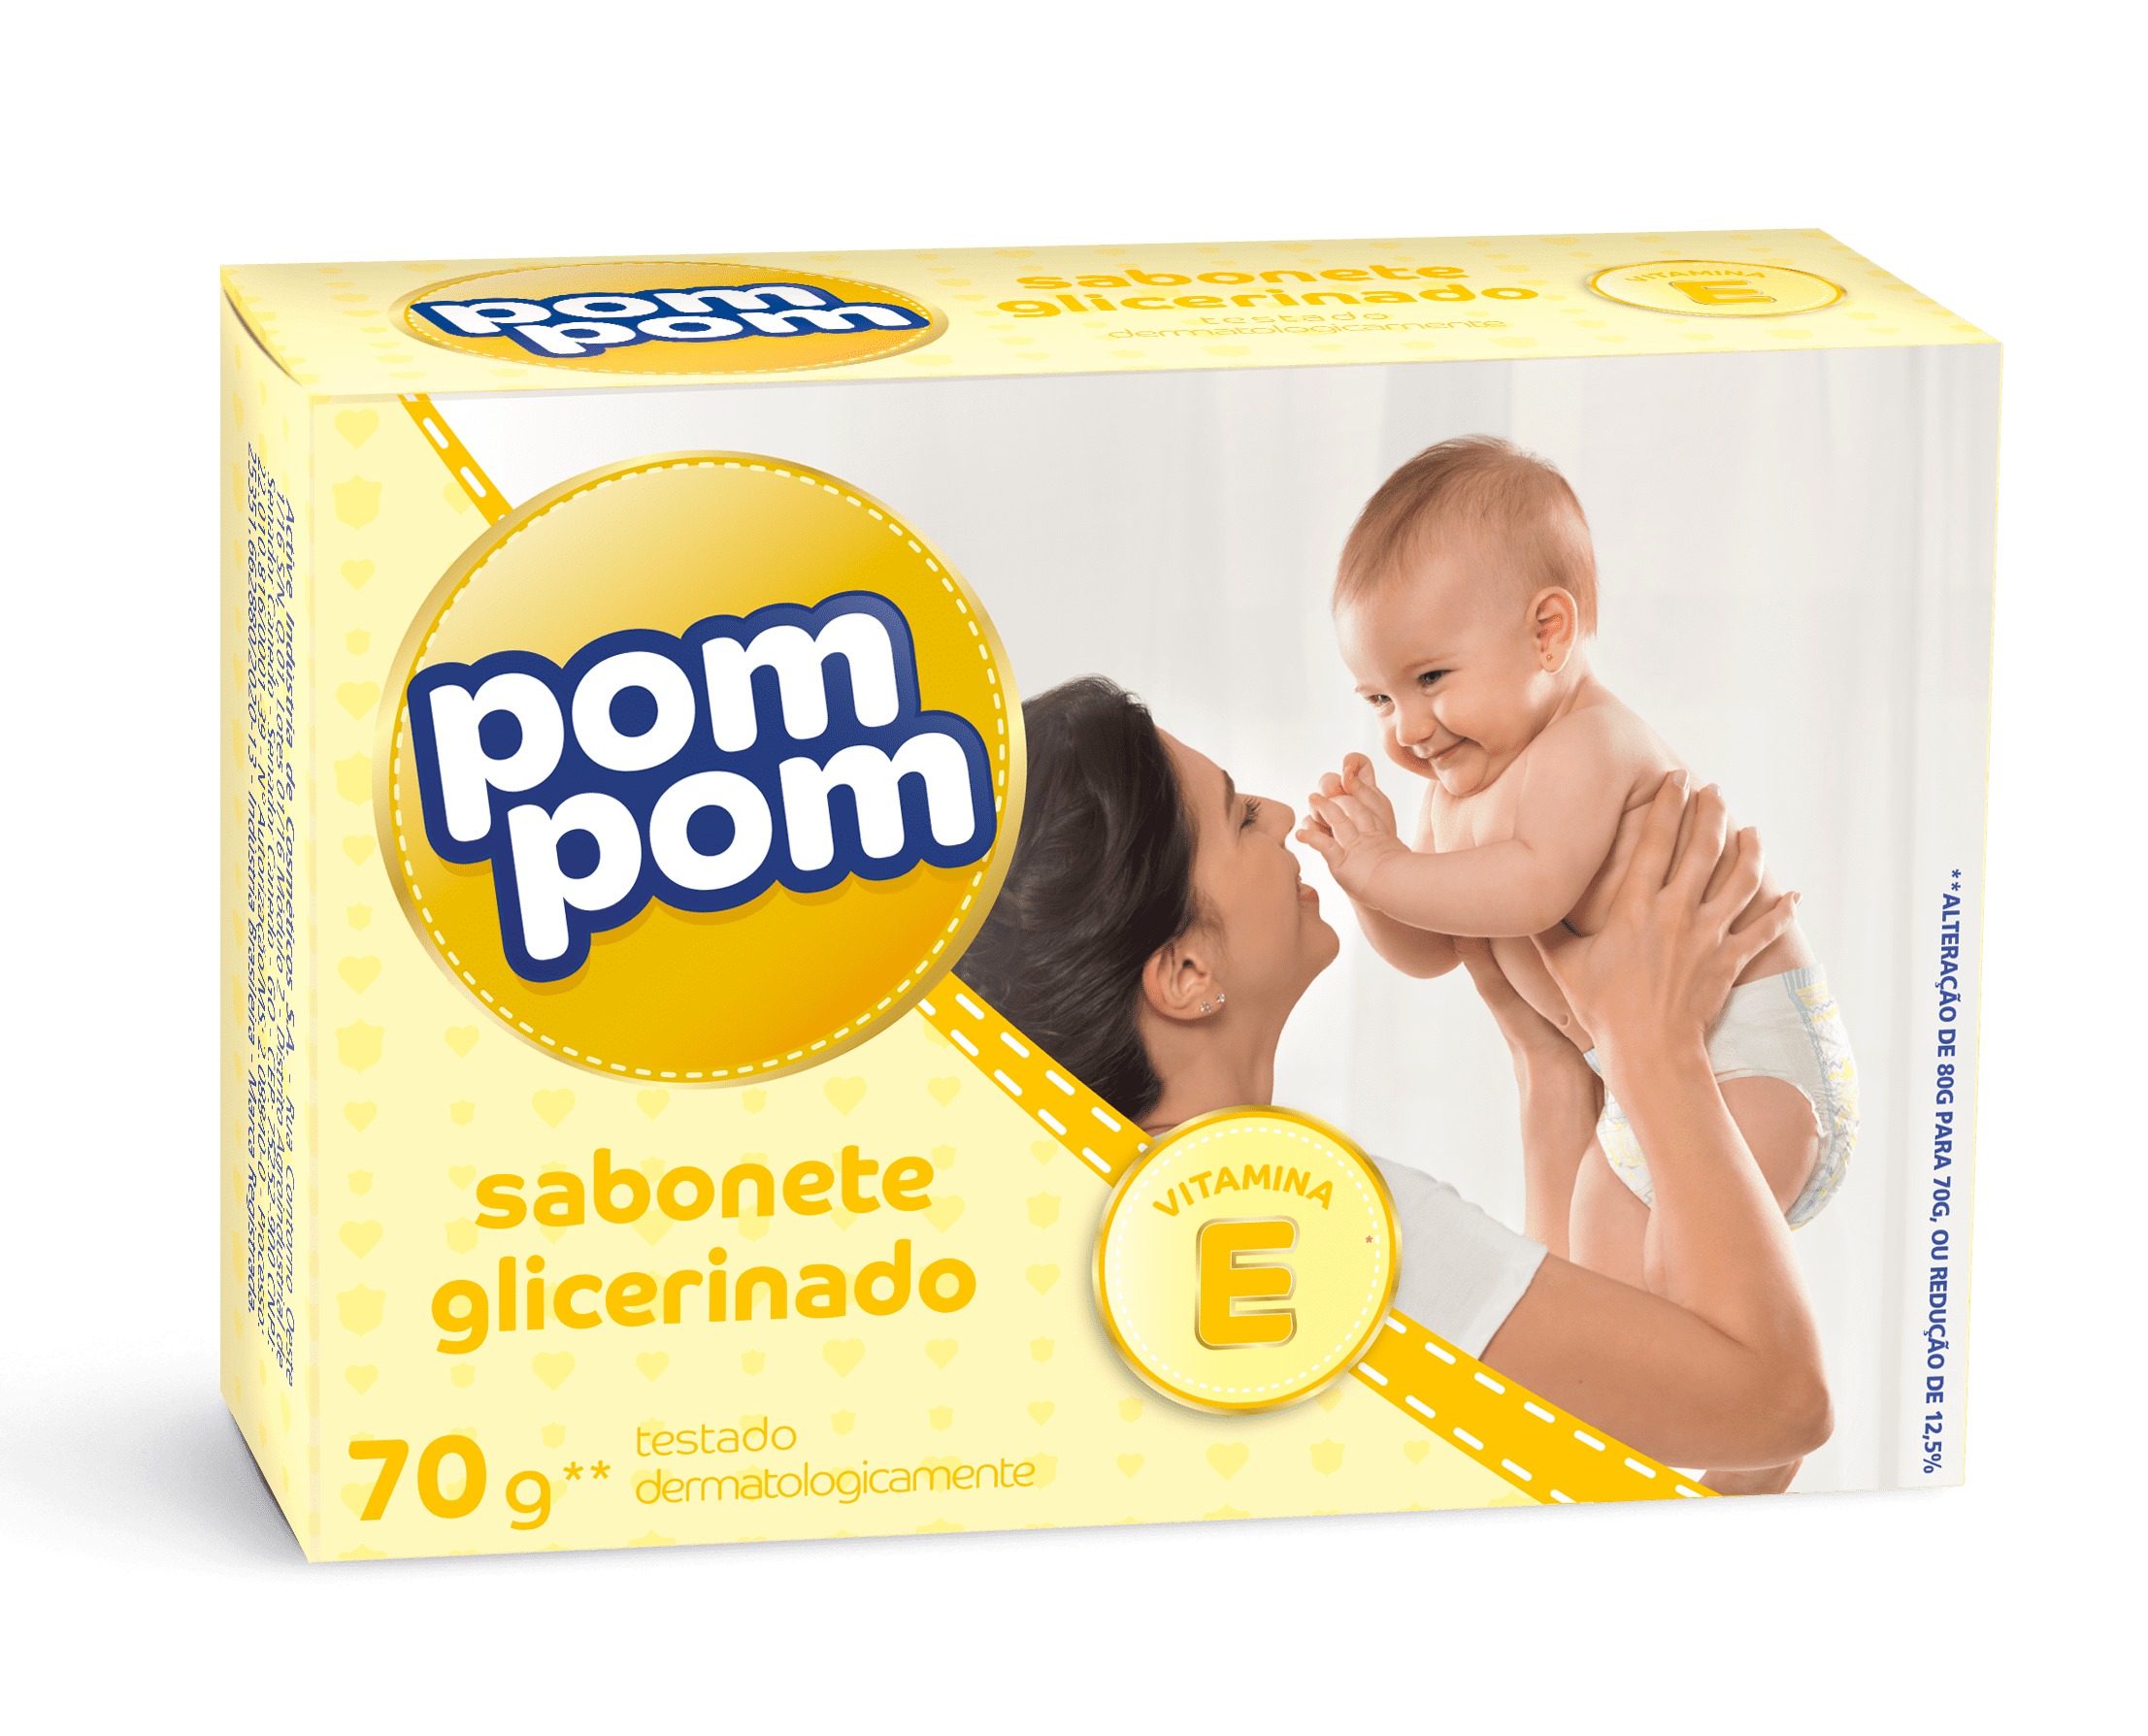 POMPOM - Glycerin Soap For Babies - 70g - FINAL SALE - EXPIRED or CLOSE TO EXPIRY